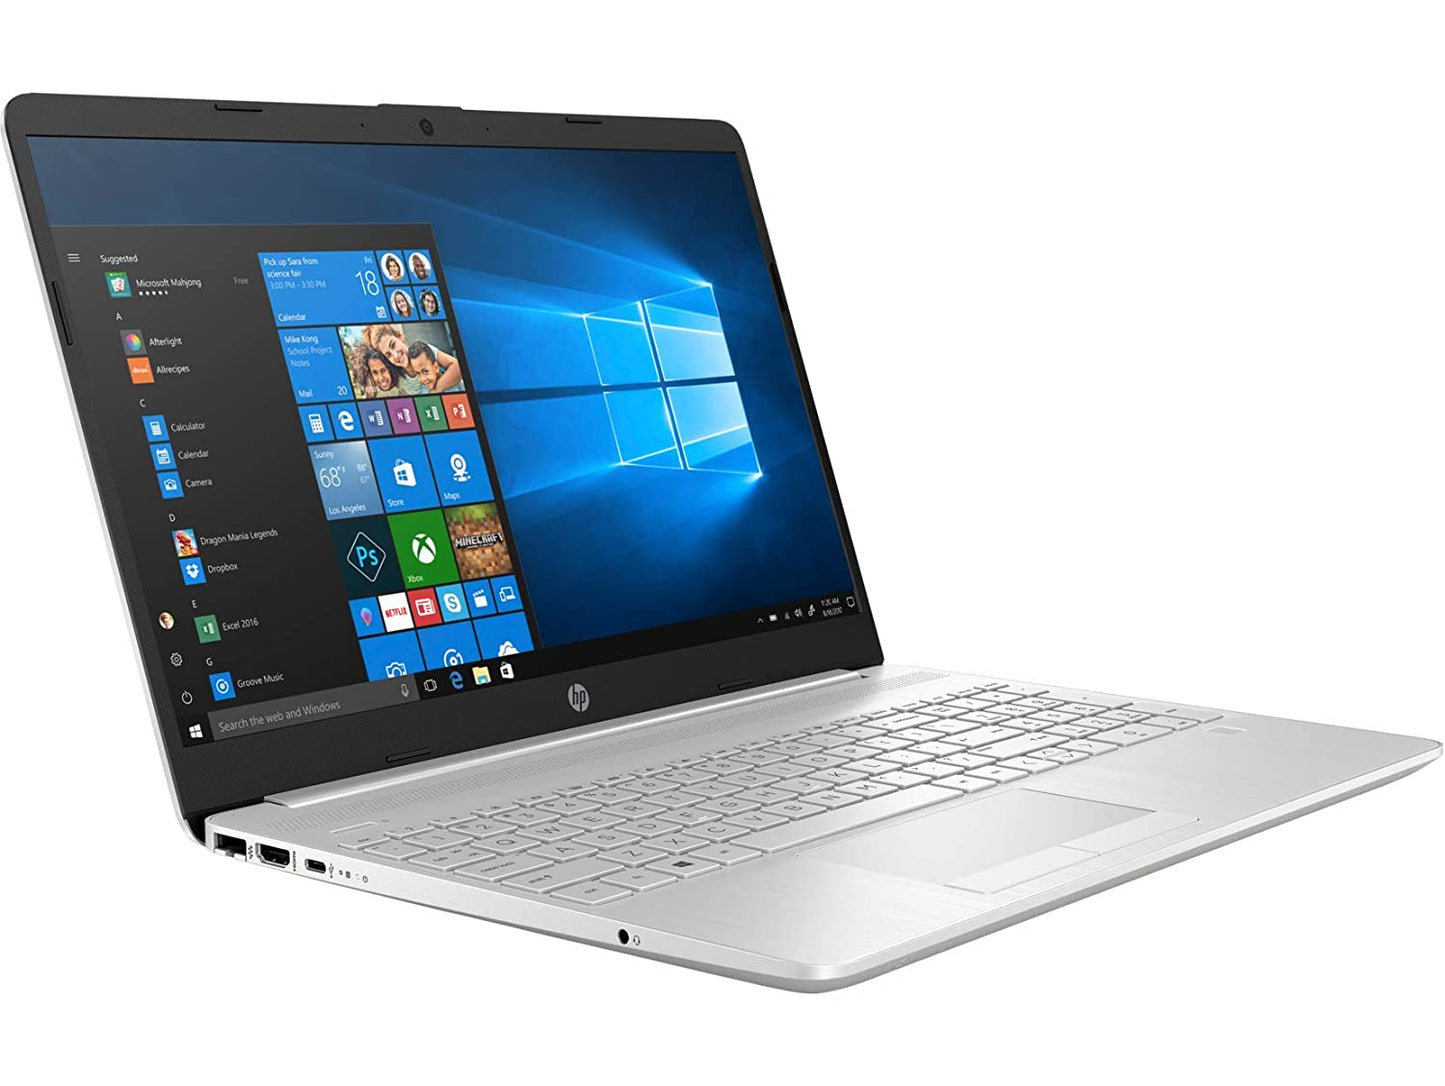 HP 15 Thin & Light 15.6-inch FHD Laptop (11th Gen Intel Core i5-1135G7, 8GB DDR4, 1TB HDD, Windows 10 Home, MS Office, Integrated Graphics, FPR, Natural Silver, 1.76 Kg), 15s-du3032TU